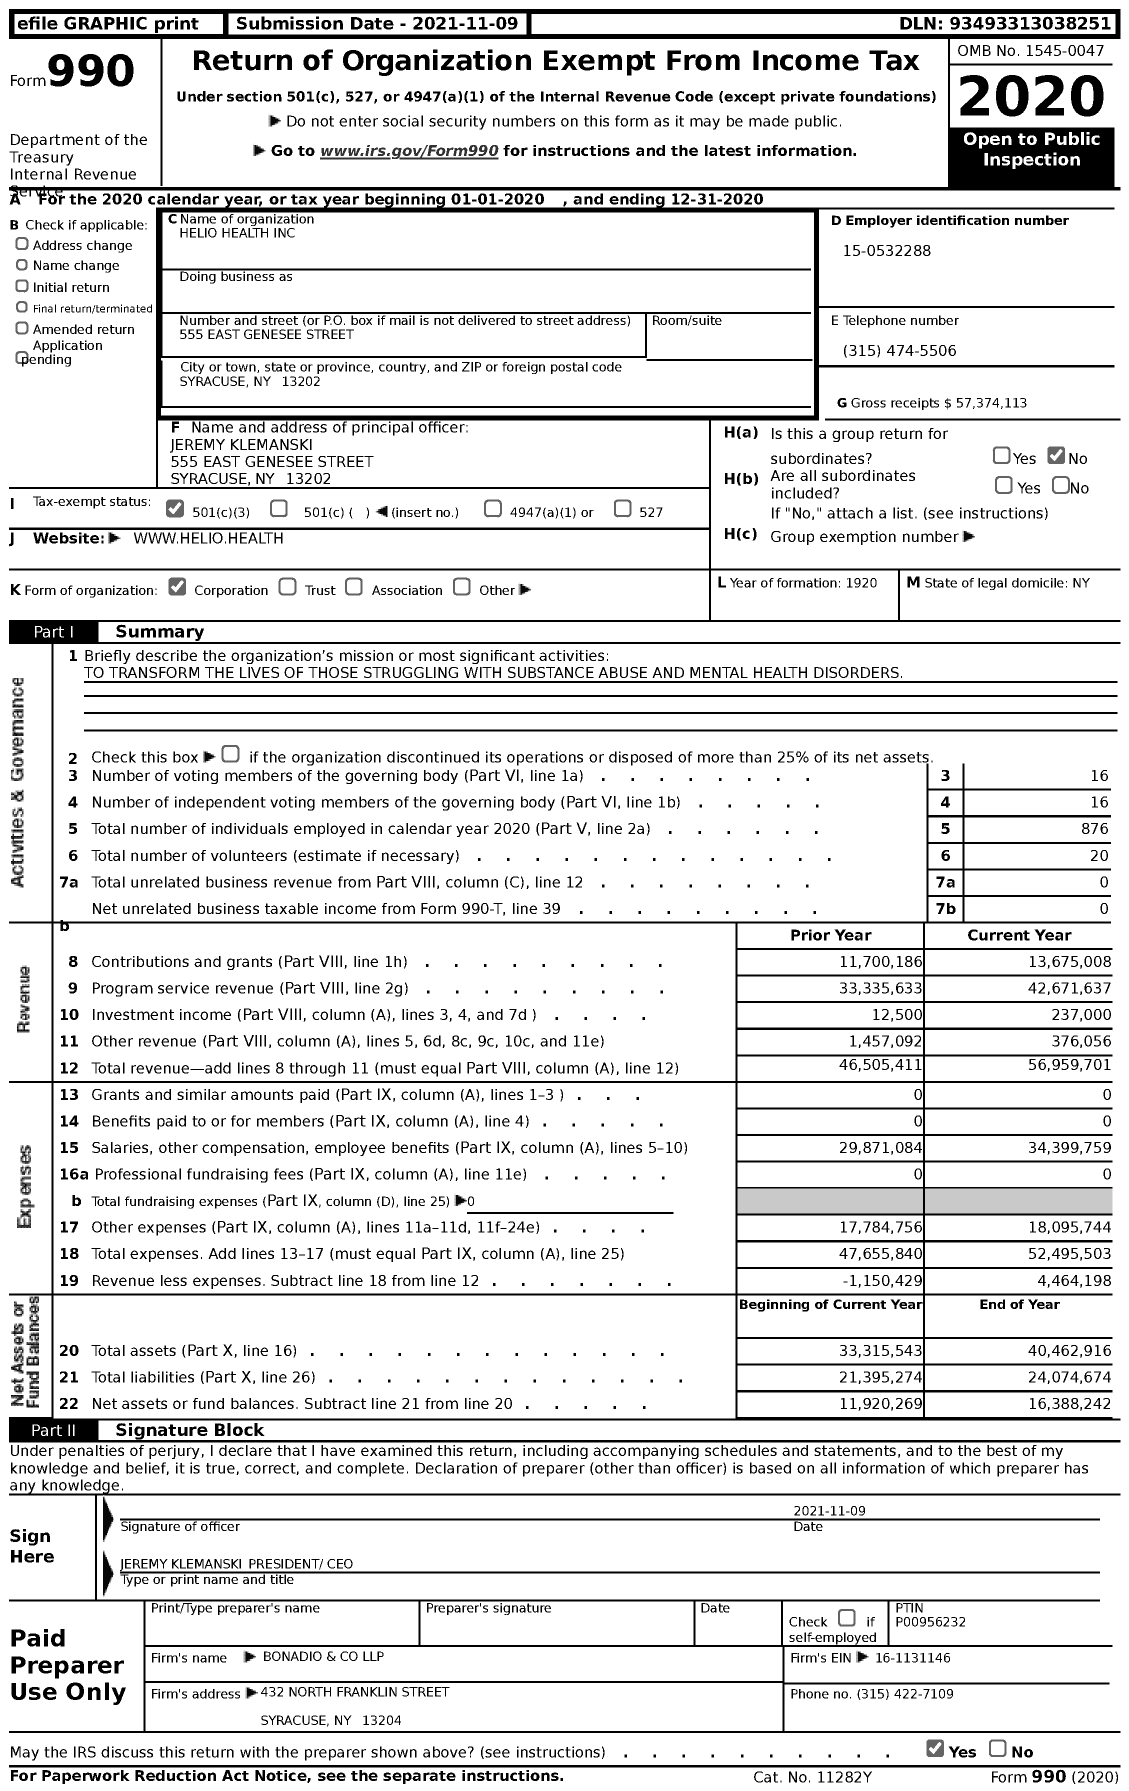 Image of first page of 2020 Form 990 for Helio Health (SBH)